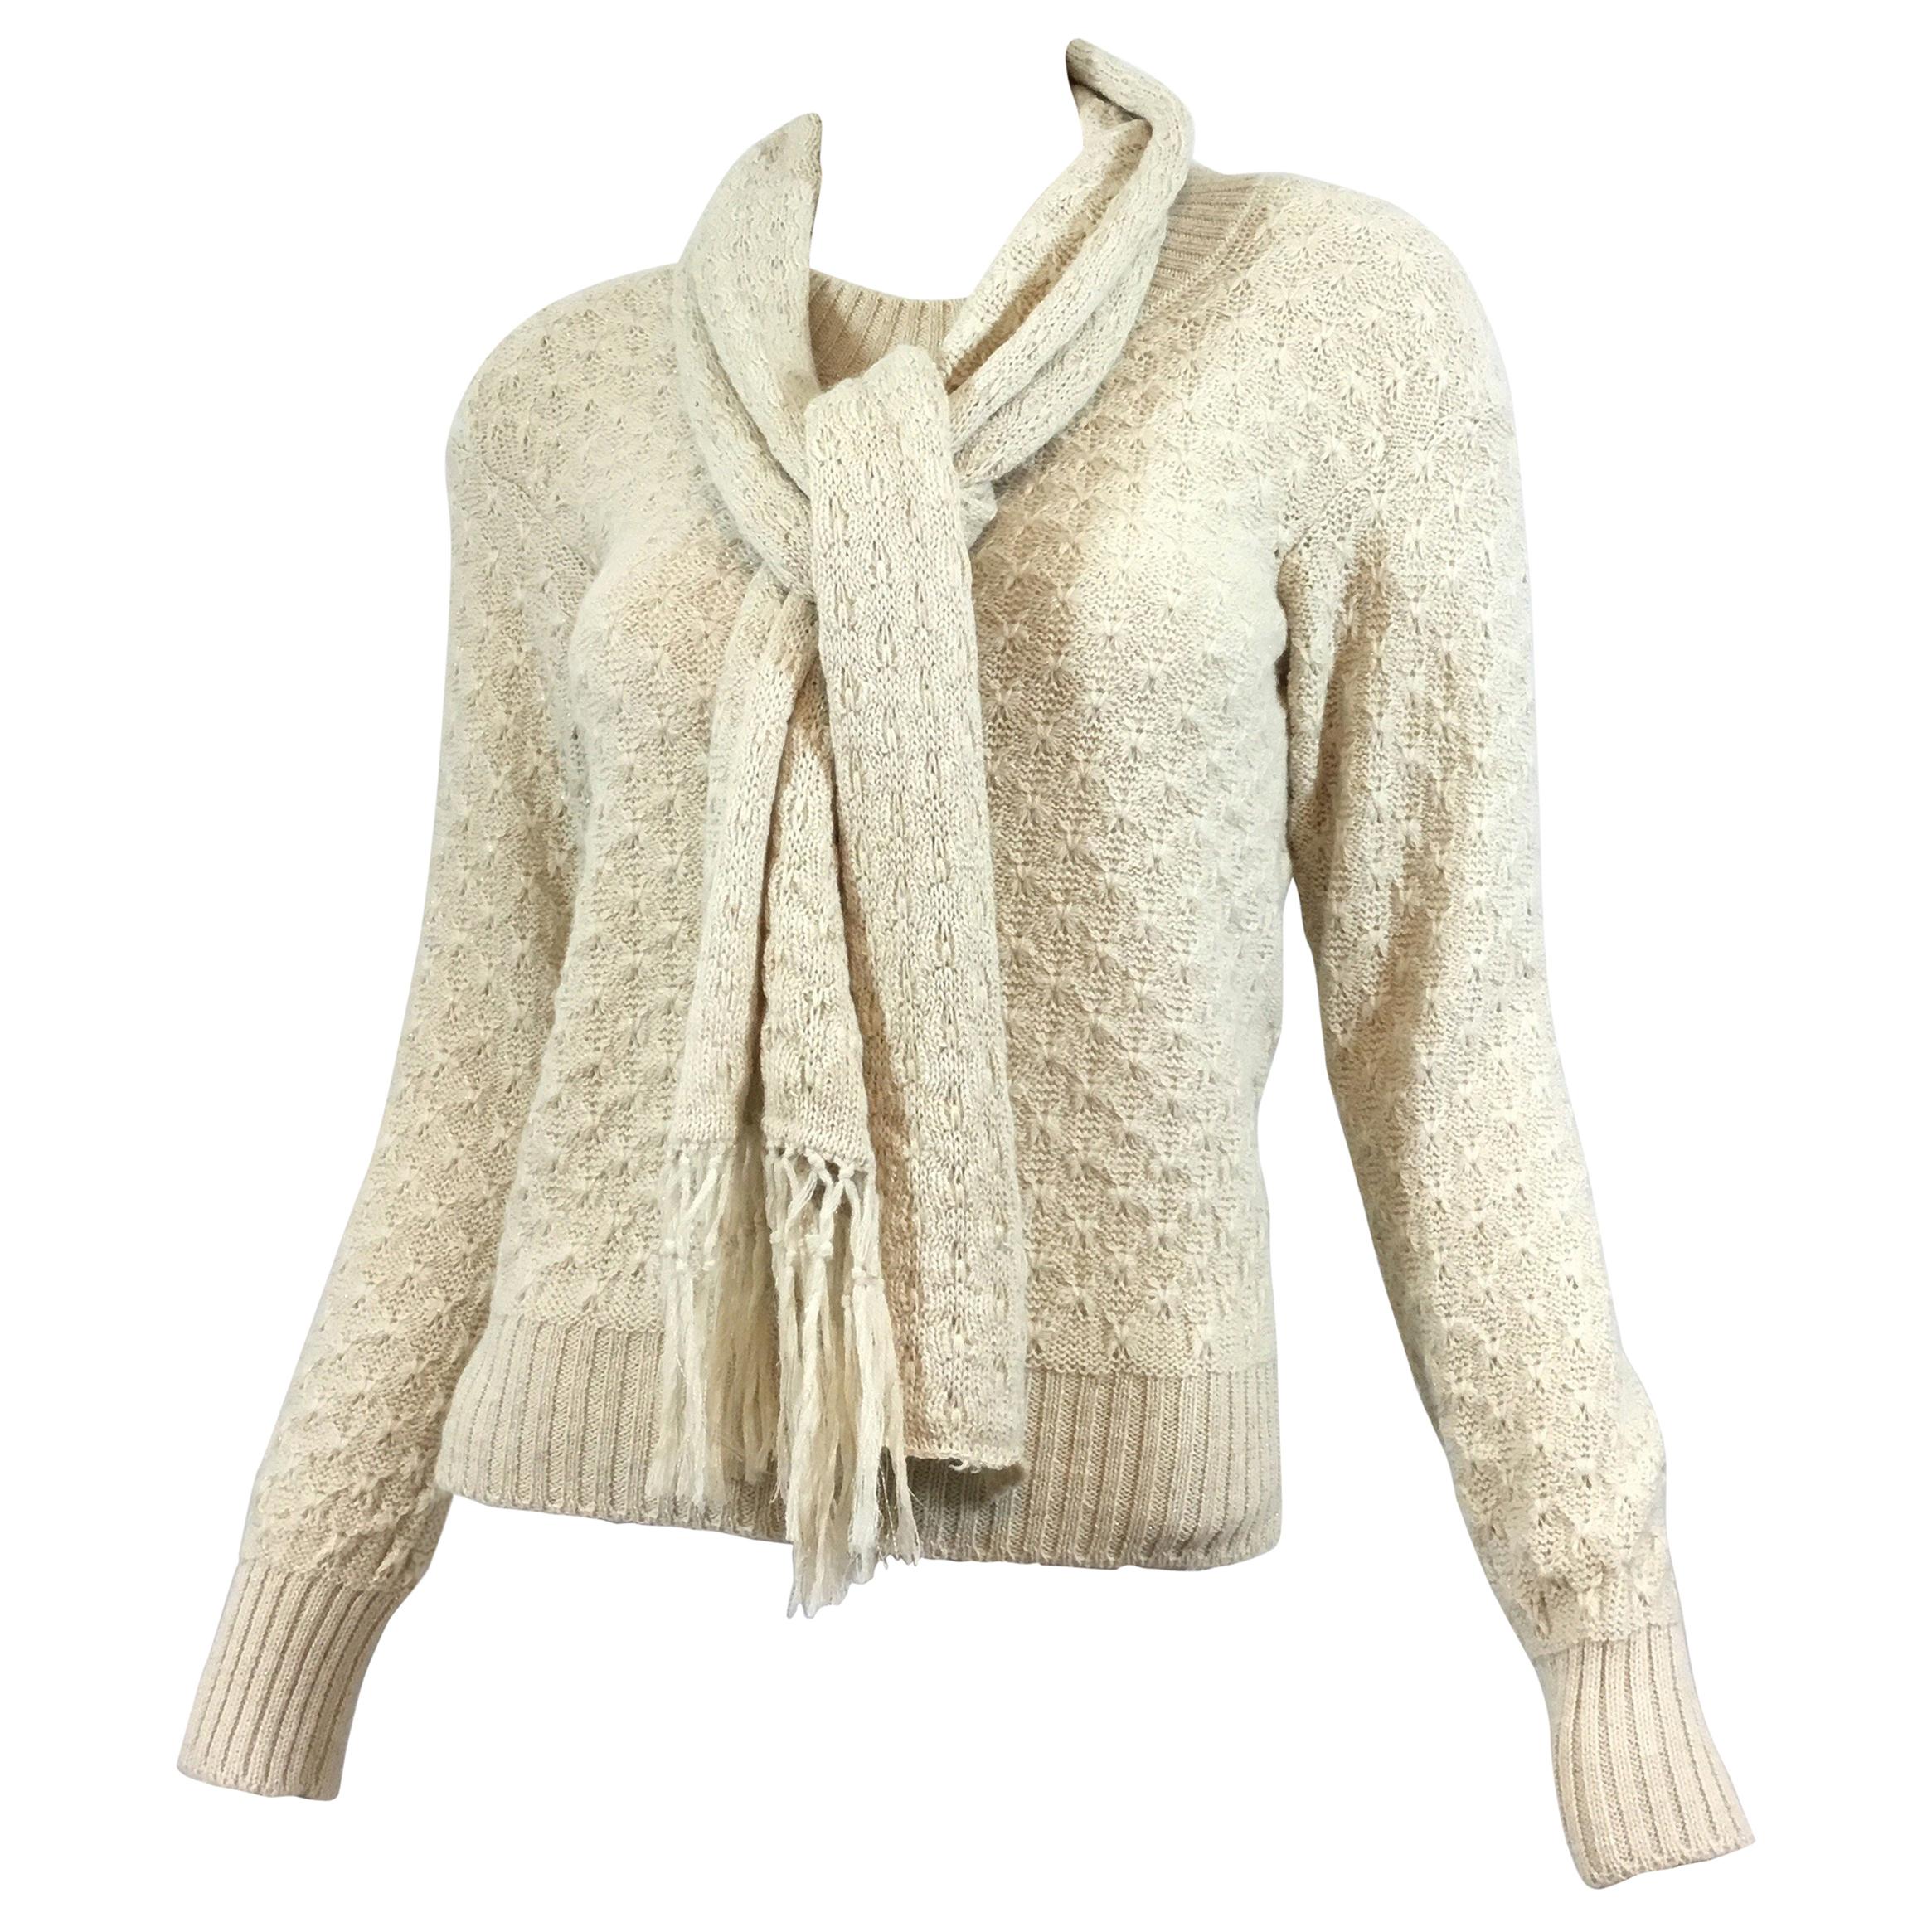 Chanel Alpaca-Blend Knit Sweater with Scarf